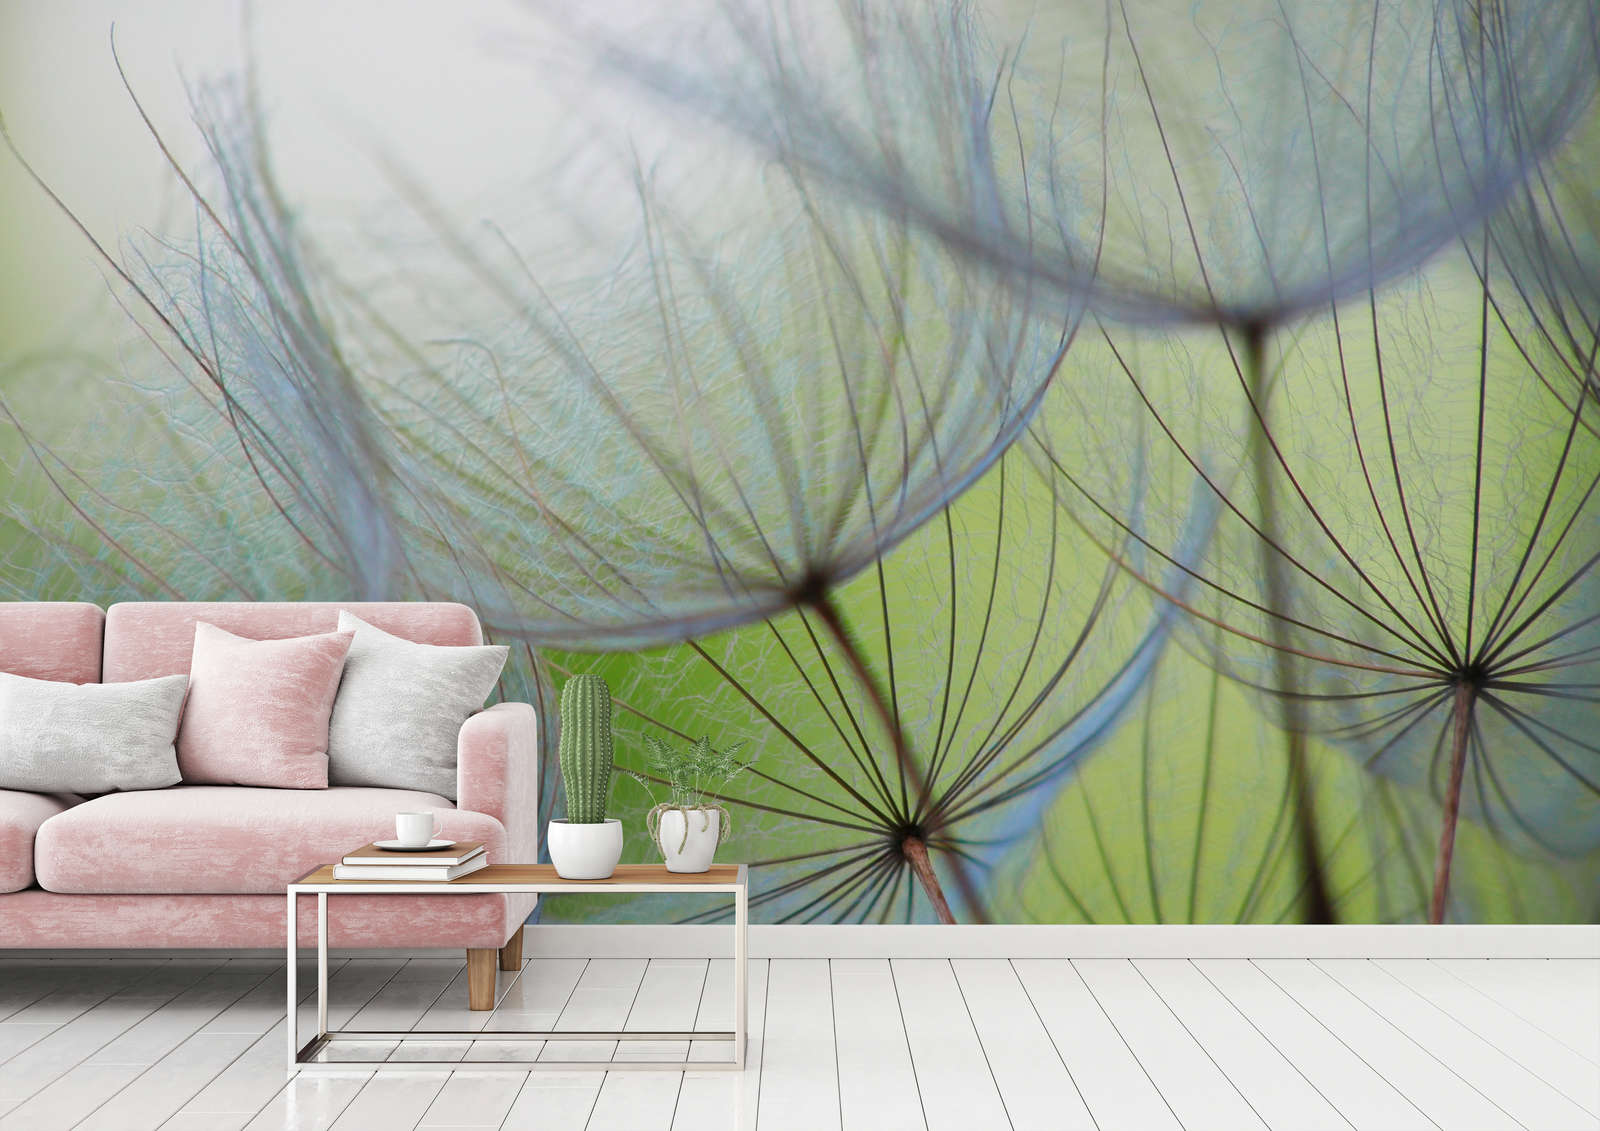             Photo wallpaper detail with dandelions - mother-of-pearl smooth non-woven
        